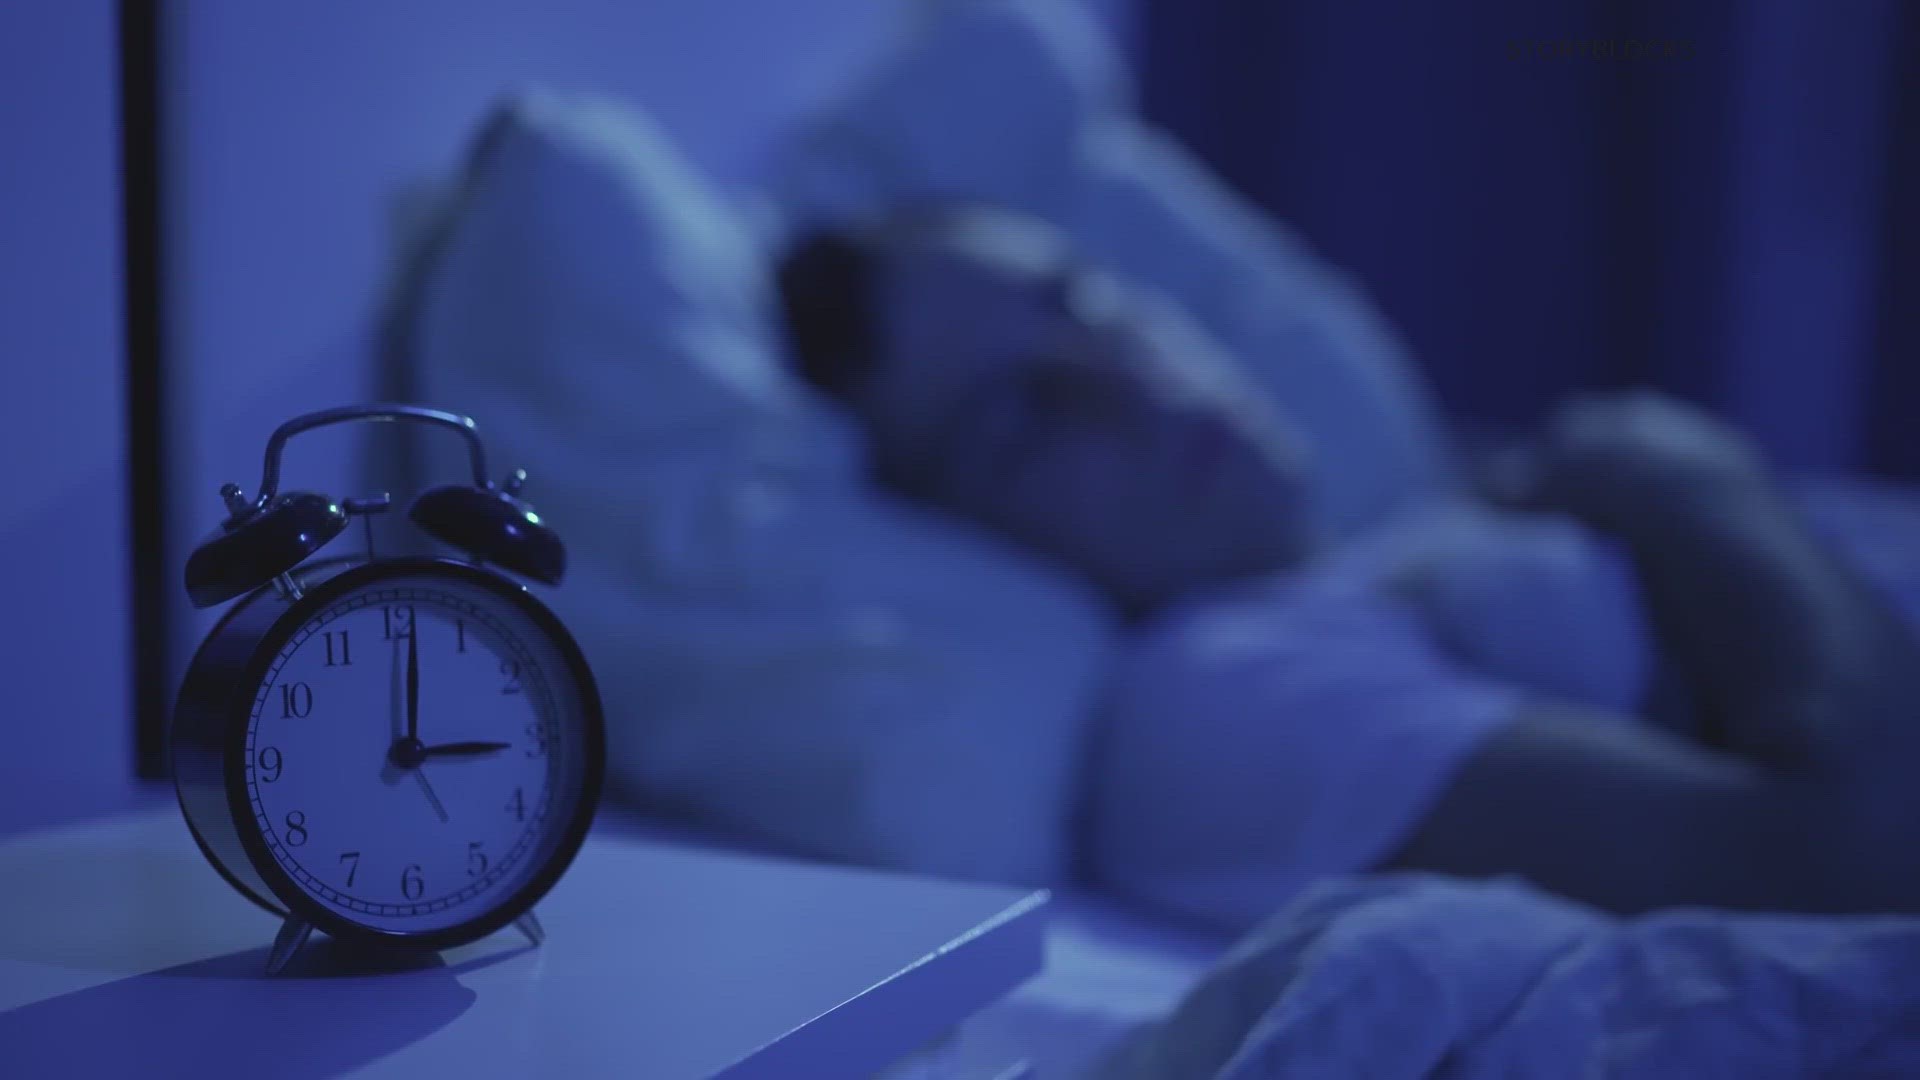 Did daylight saving time mess up your sleep schedule? VERIFY tested some of the most common methods people use to get back on track.